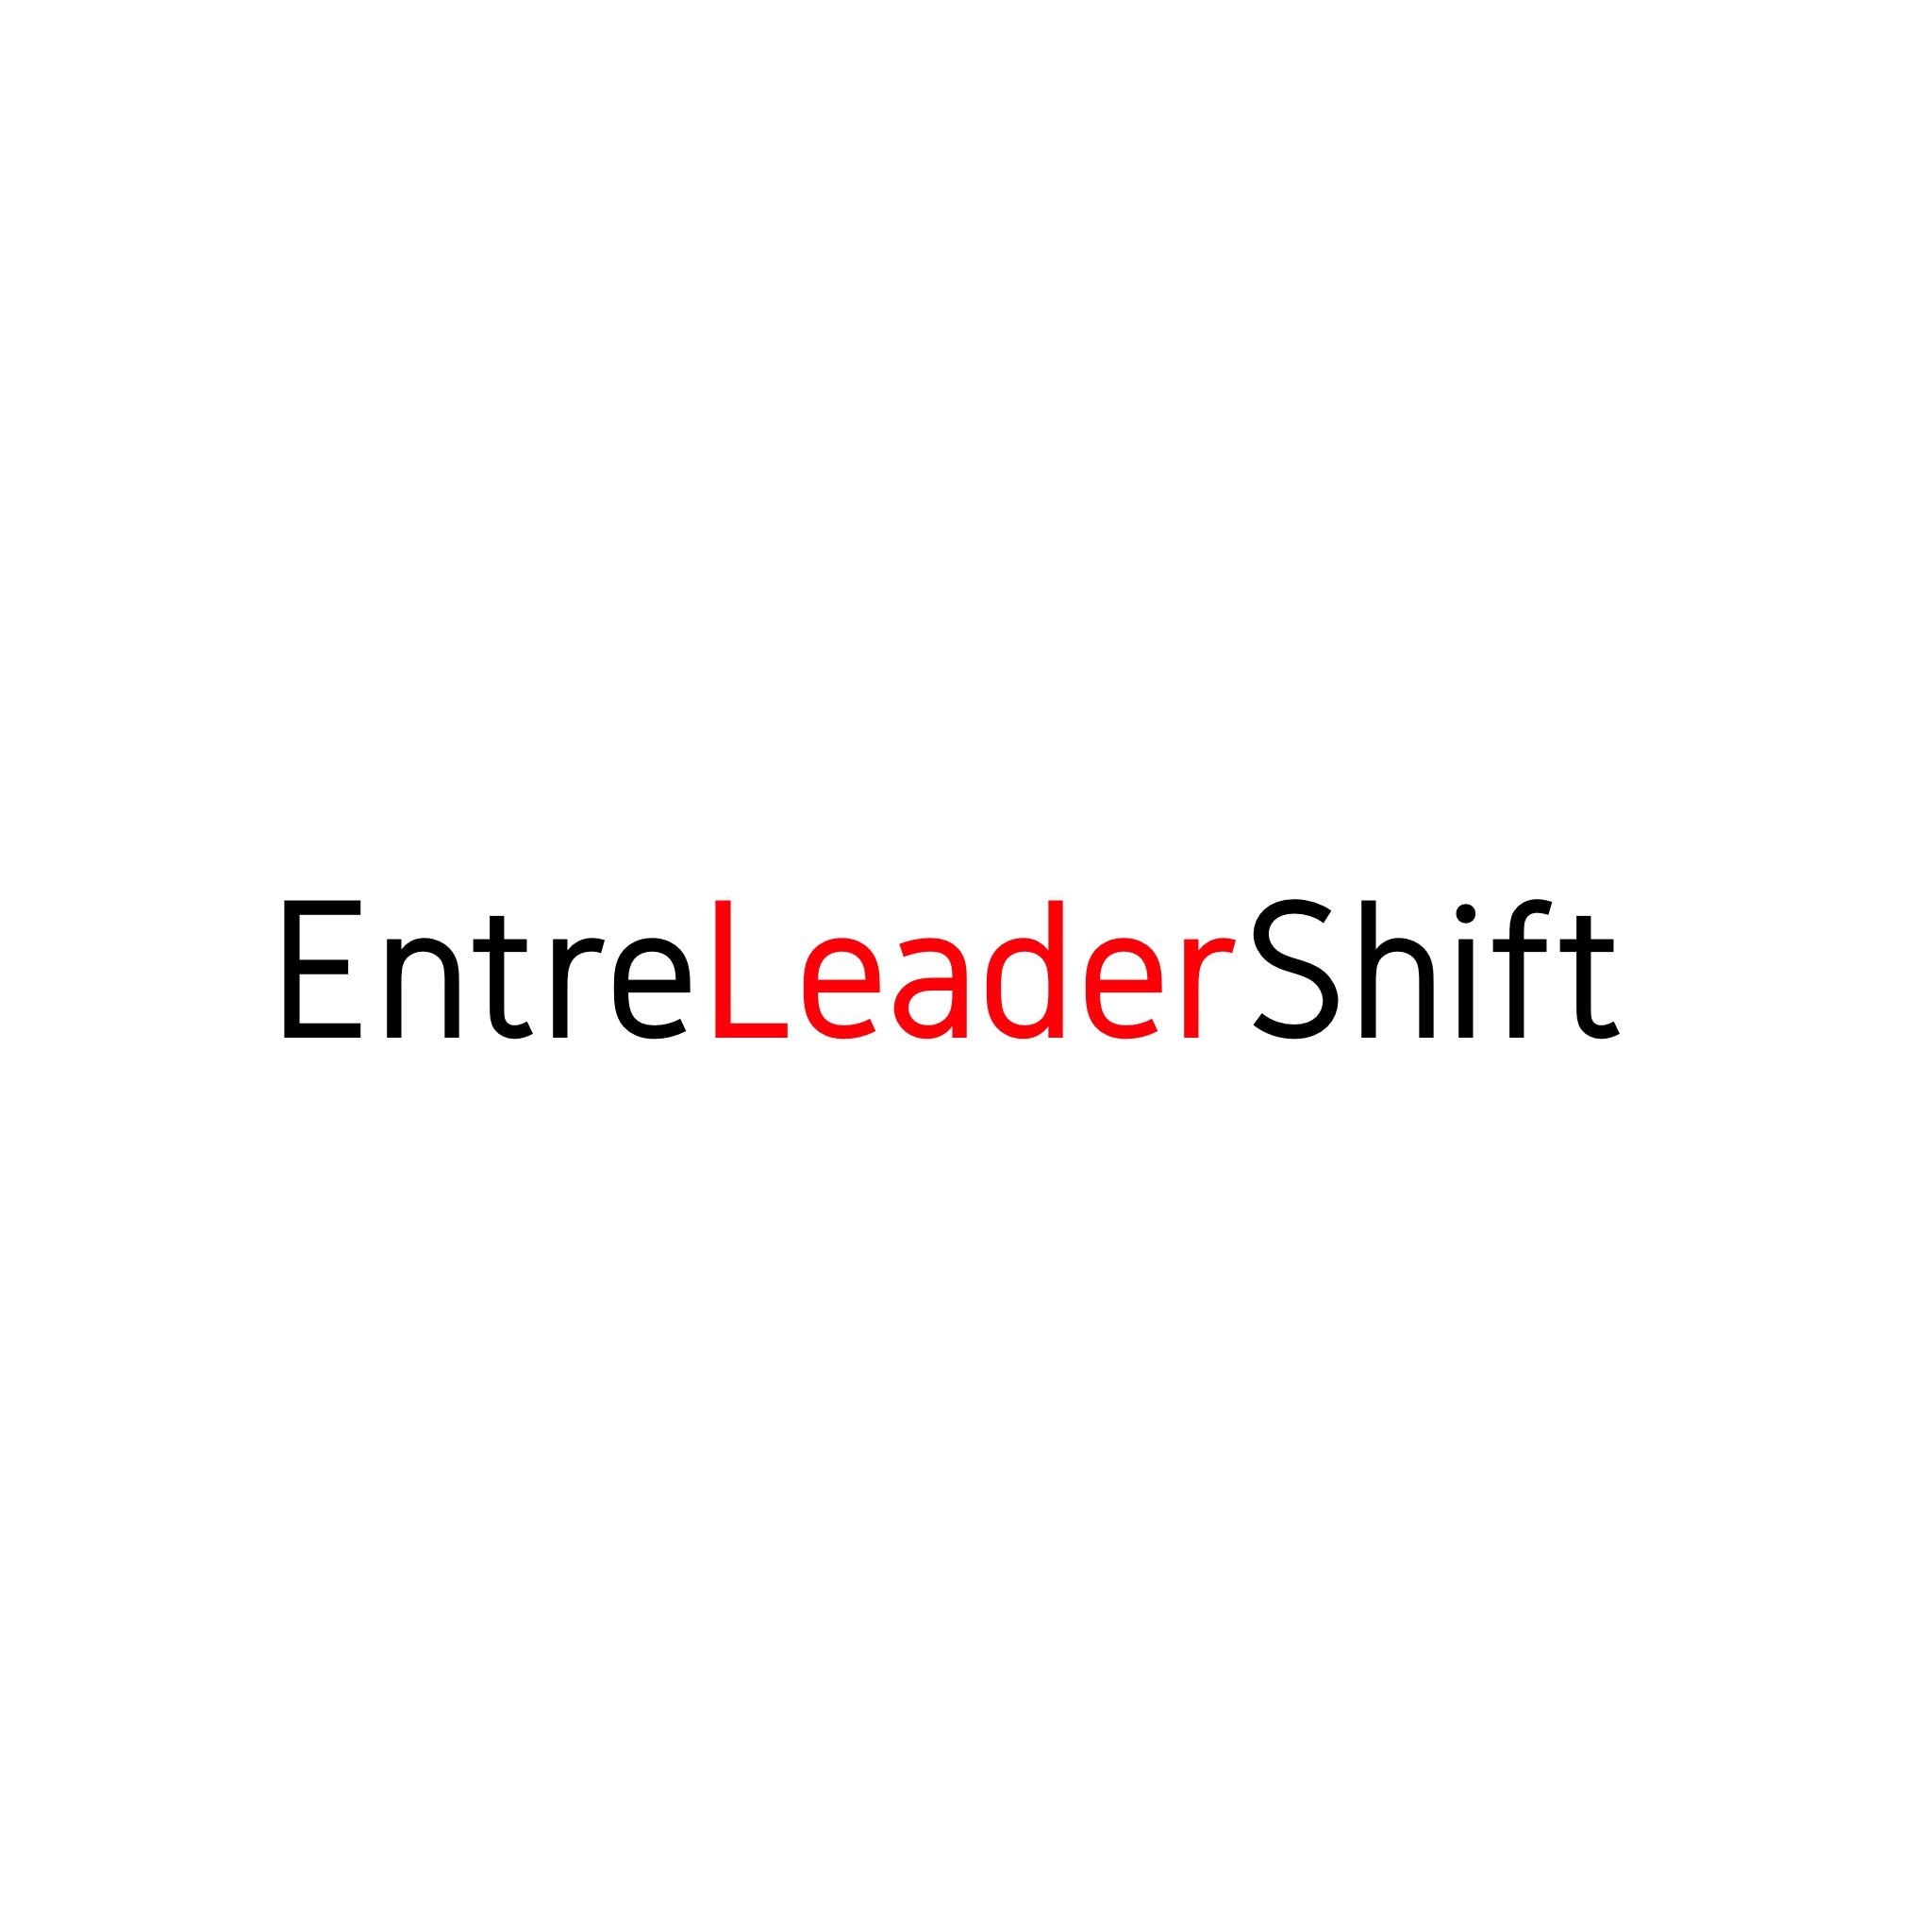 Developing the Leader in the Entrepreneur